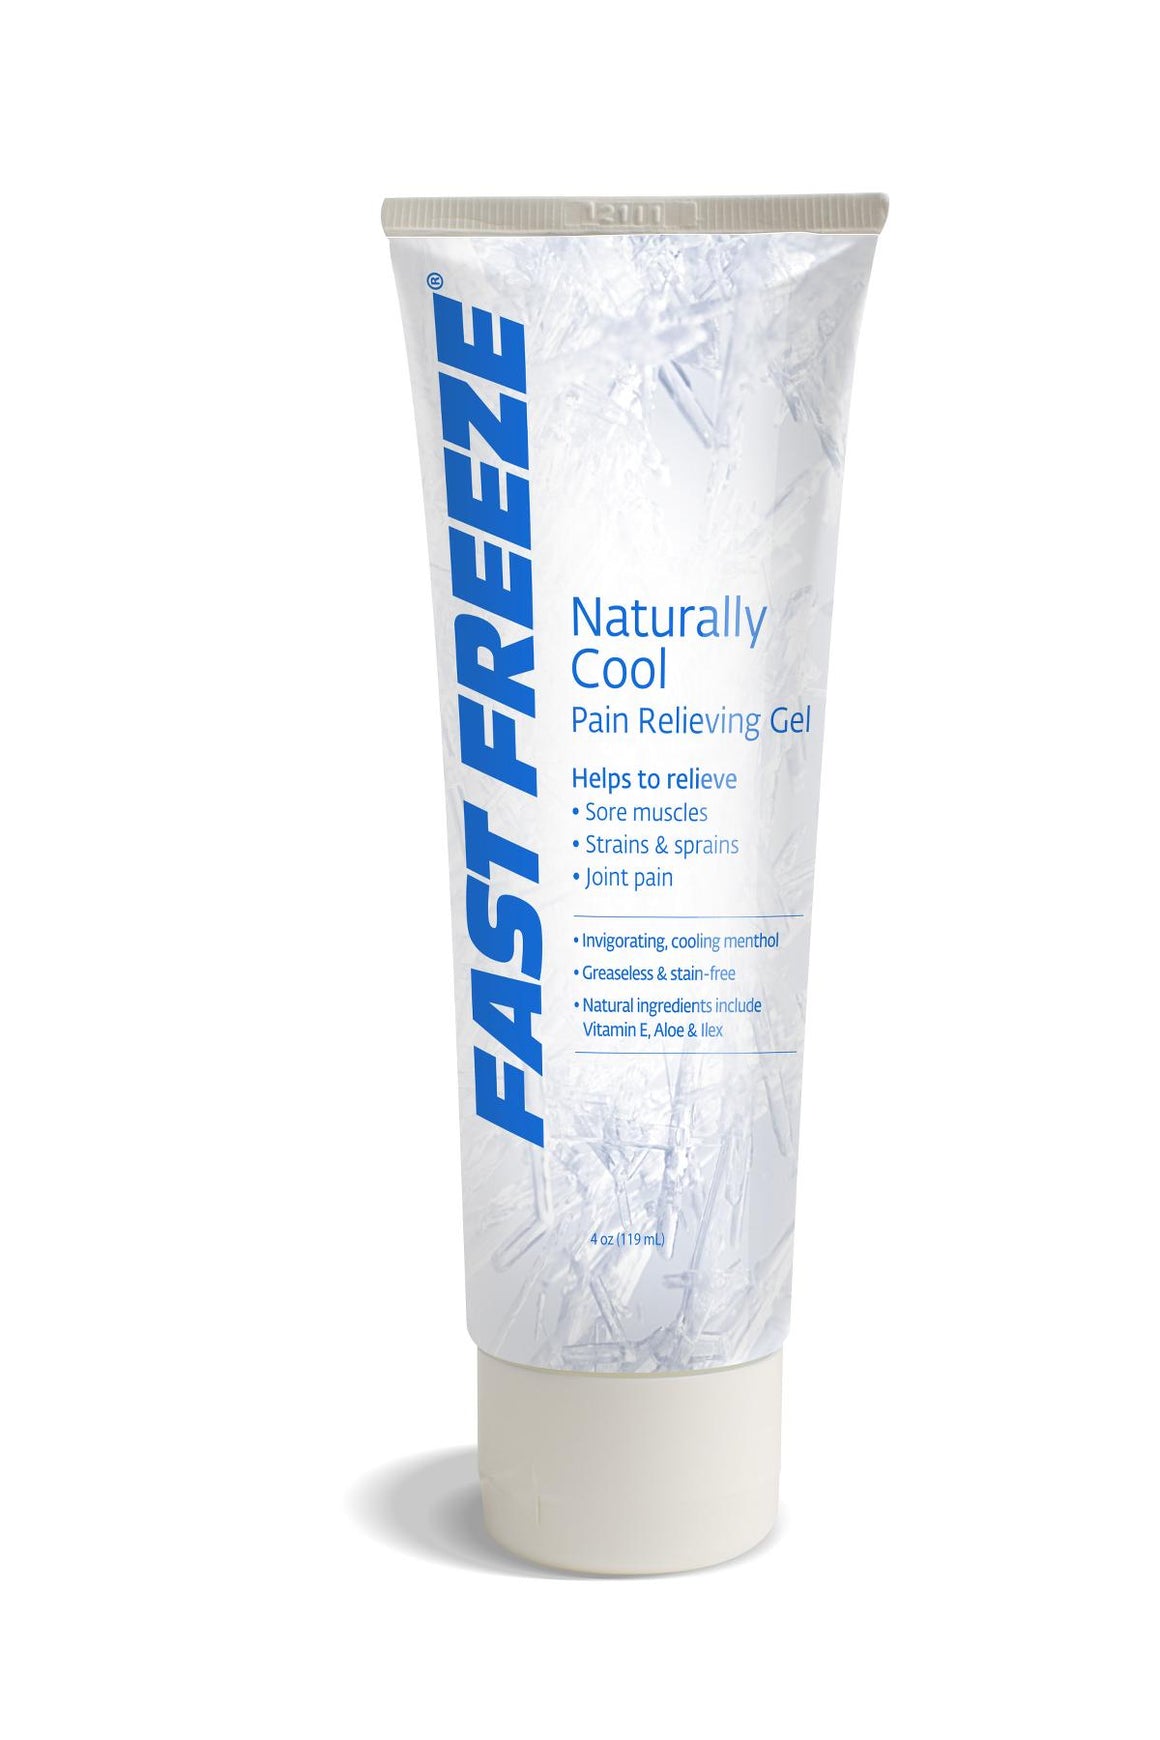 Fast Freeze Cold Therapy Pain Relief Gel,4.000 OZ, Each